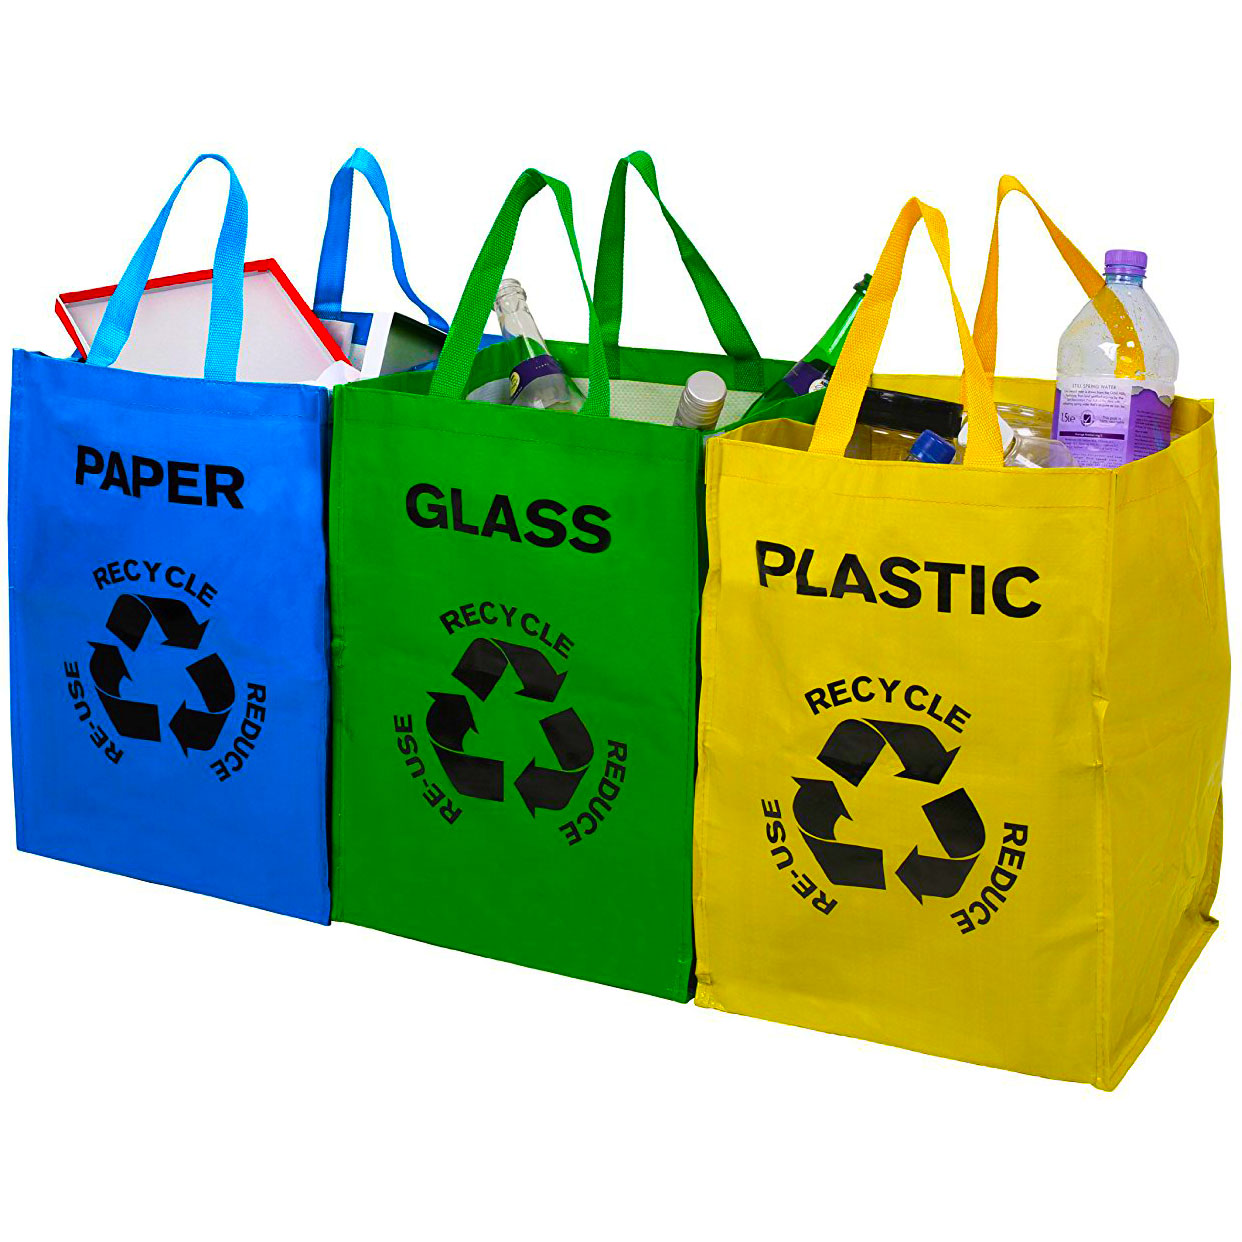 Premier Housewares Recycling Bags/Recycling Bin/Plastic Glass Paper  Recycling Bags with Handles/Multicoloured - Set of 3